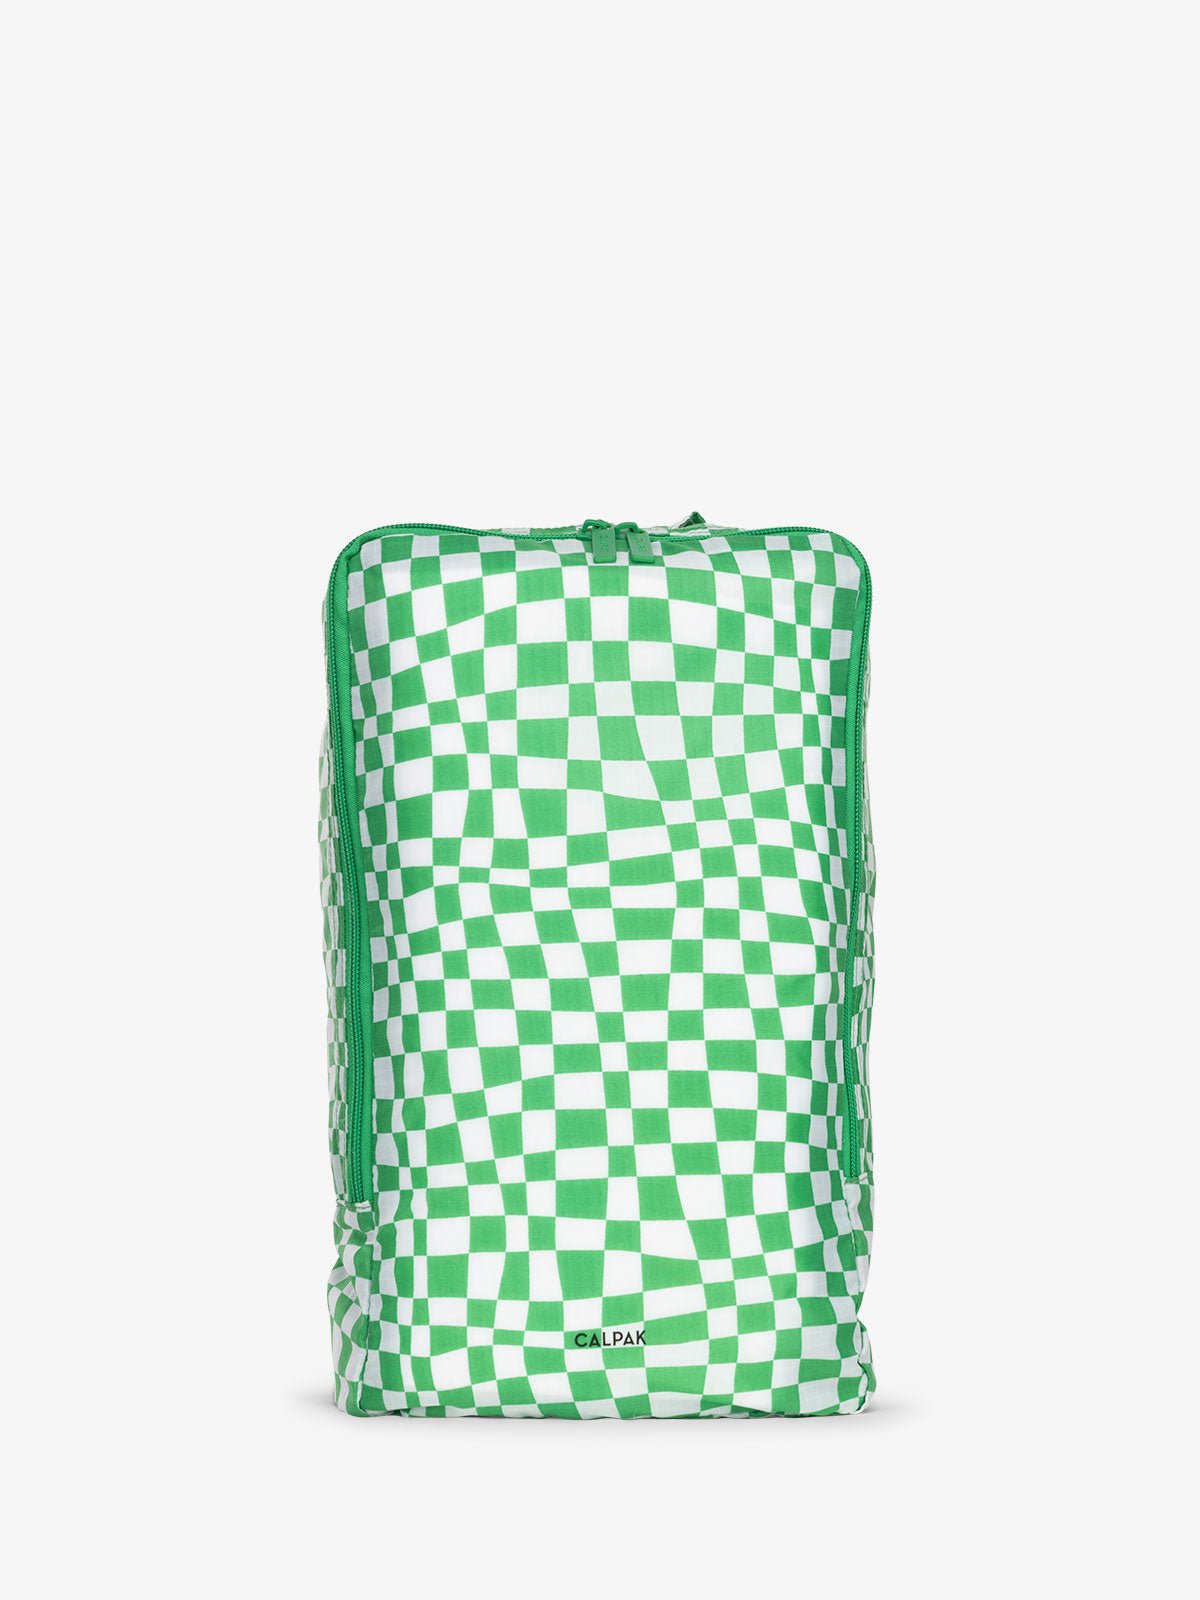 CALPAK Compakt shoe storage travel bag with handle in green checkerboard